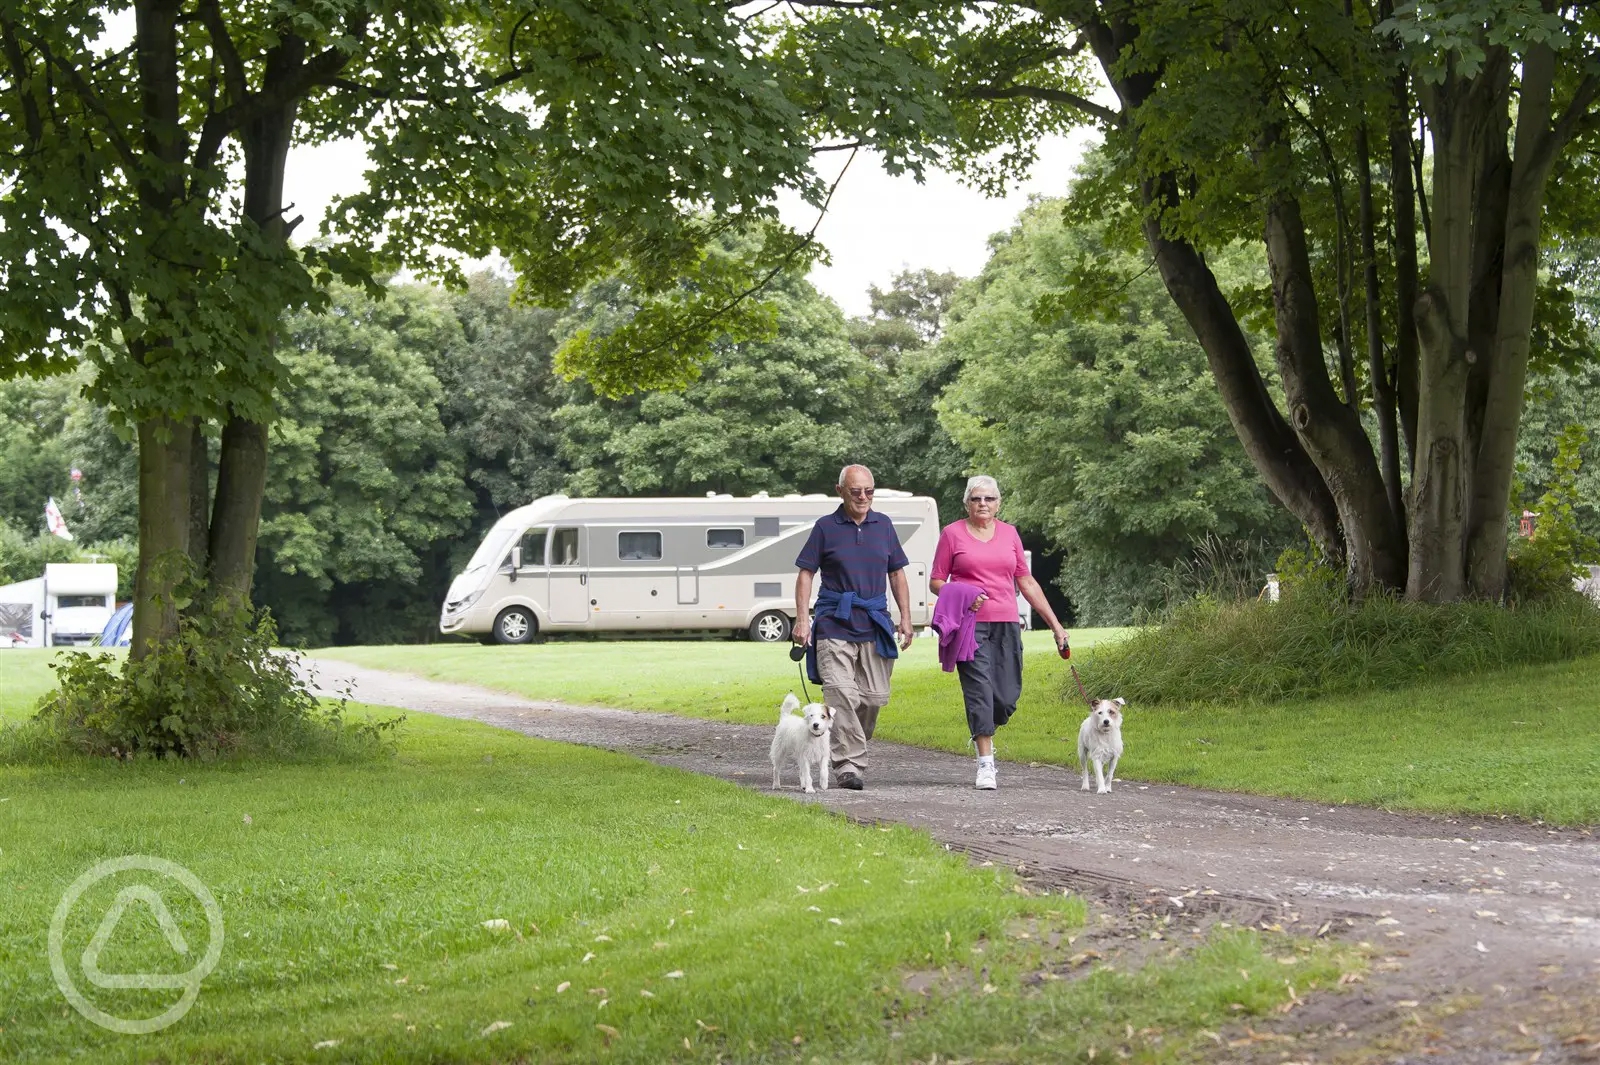 Wolverley Camping and Caravanning Club Site in Kidderminster